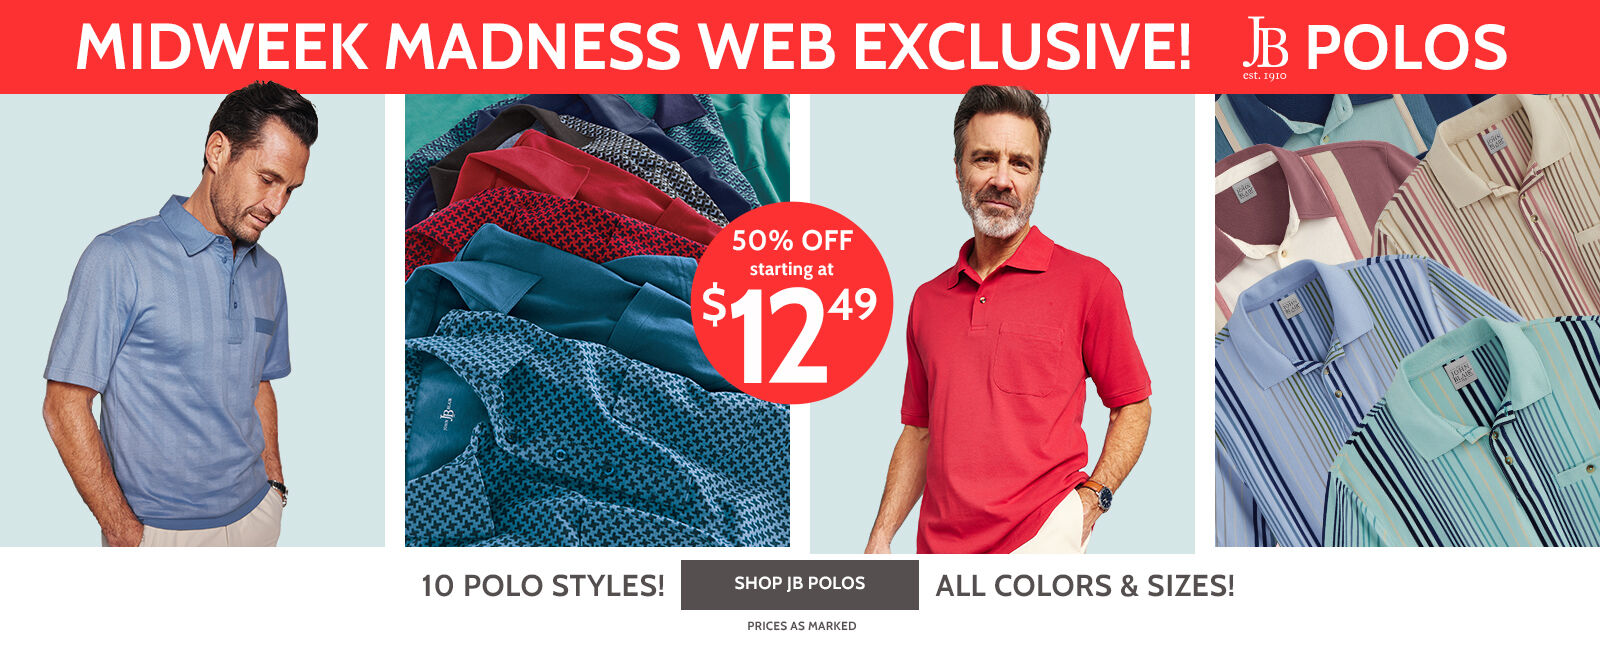 midweek madness web exclusive jb polos 10 styles. all sizes. all colors 50% off starting at $12.49 10 polo styles! shop jb polos all colors & sizes prices as marked